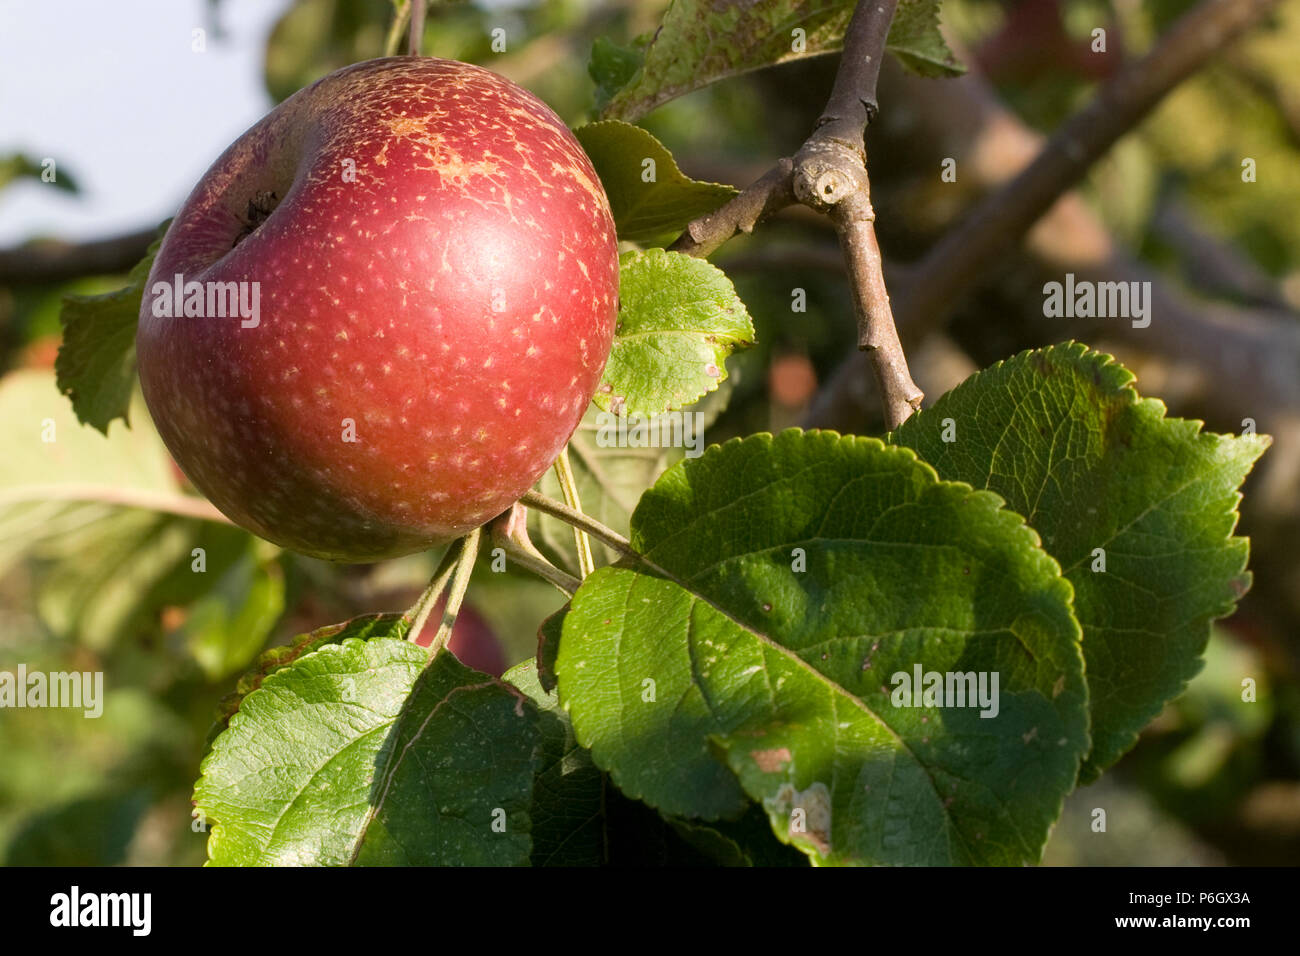 Herefordshire Beefing. Dessert and cooking apple. Ripe fruit on a tree in an organic orchard in Bristol. Stock Photo